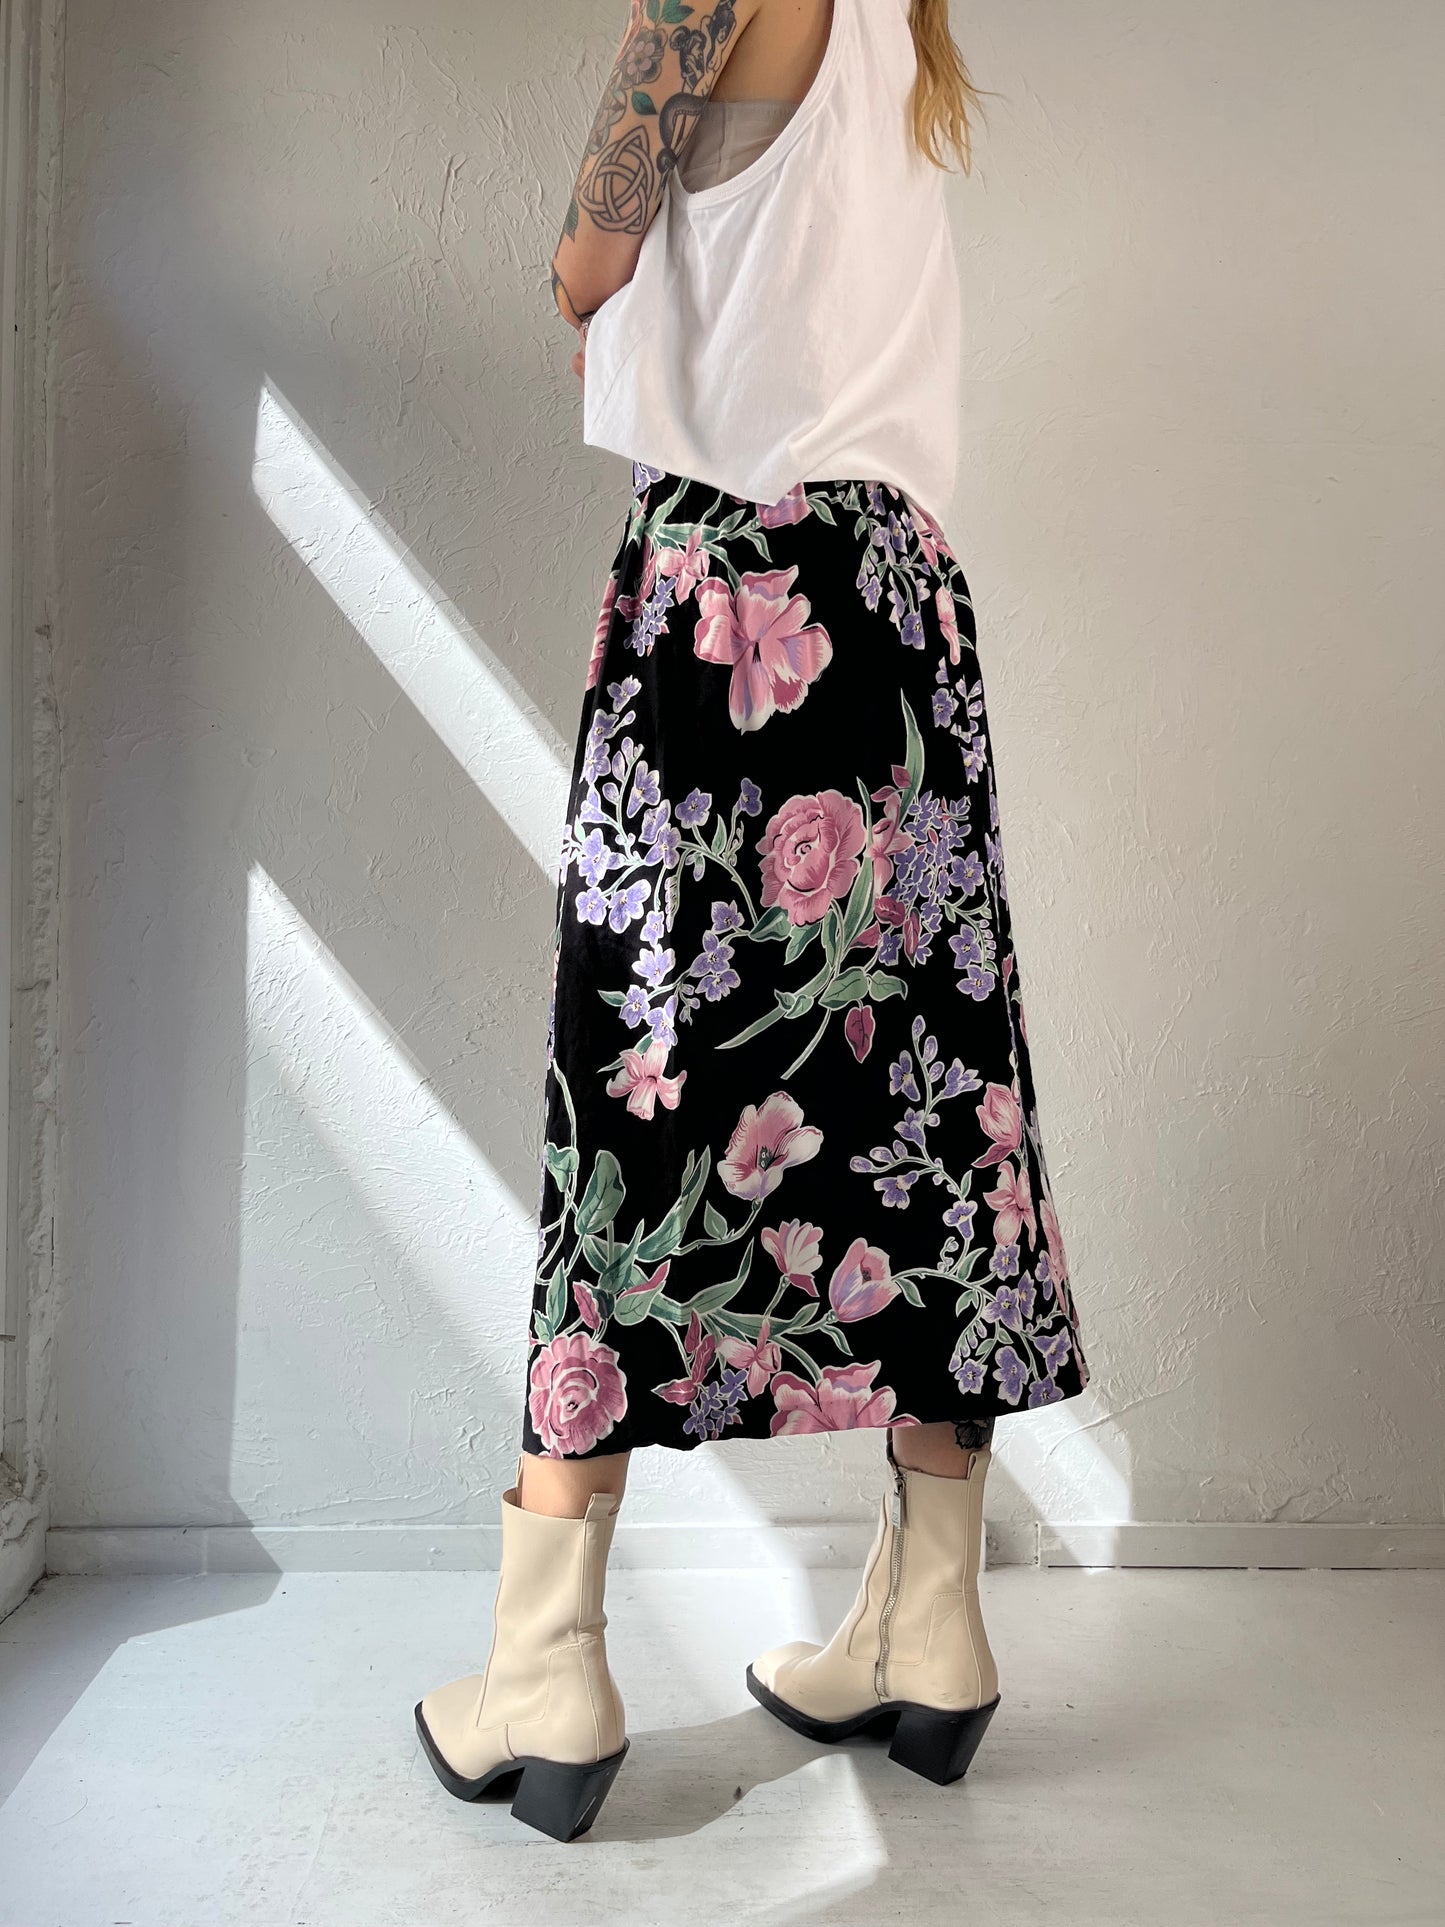 90s 'Toby' Black Floral Midi Skirt / Small